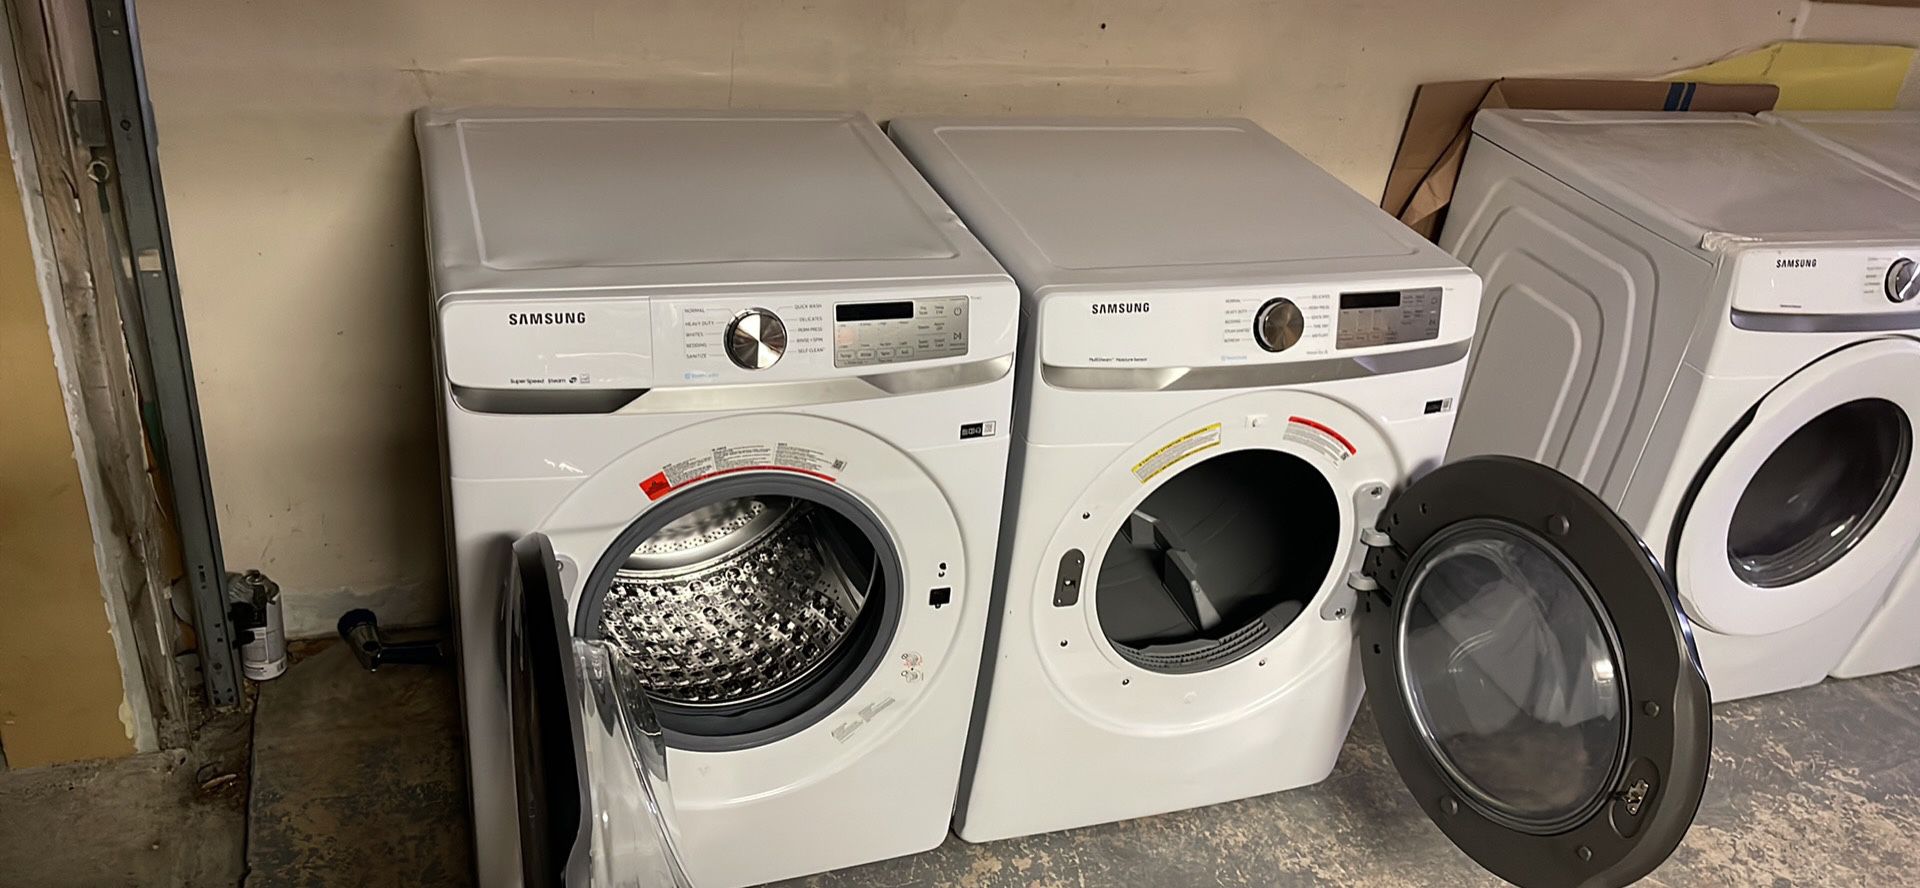 New Open Box Samsung Washer And Dryer 27” Scratch And Dents